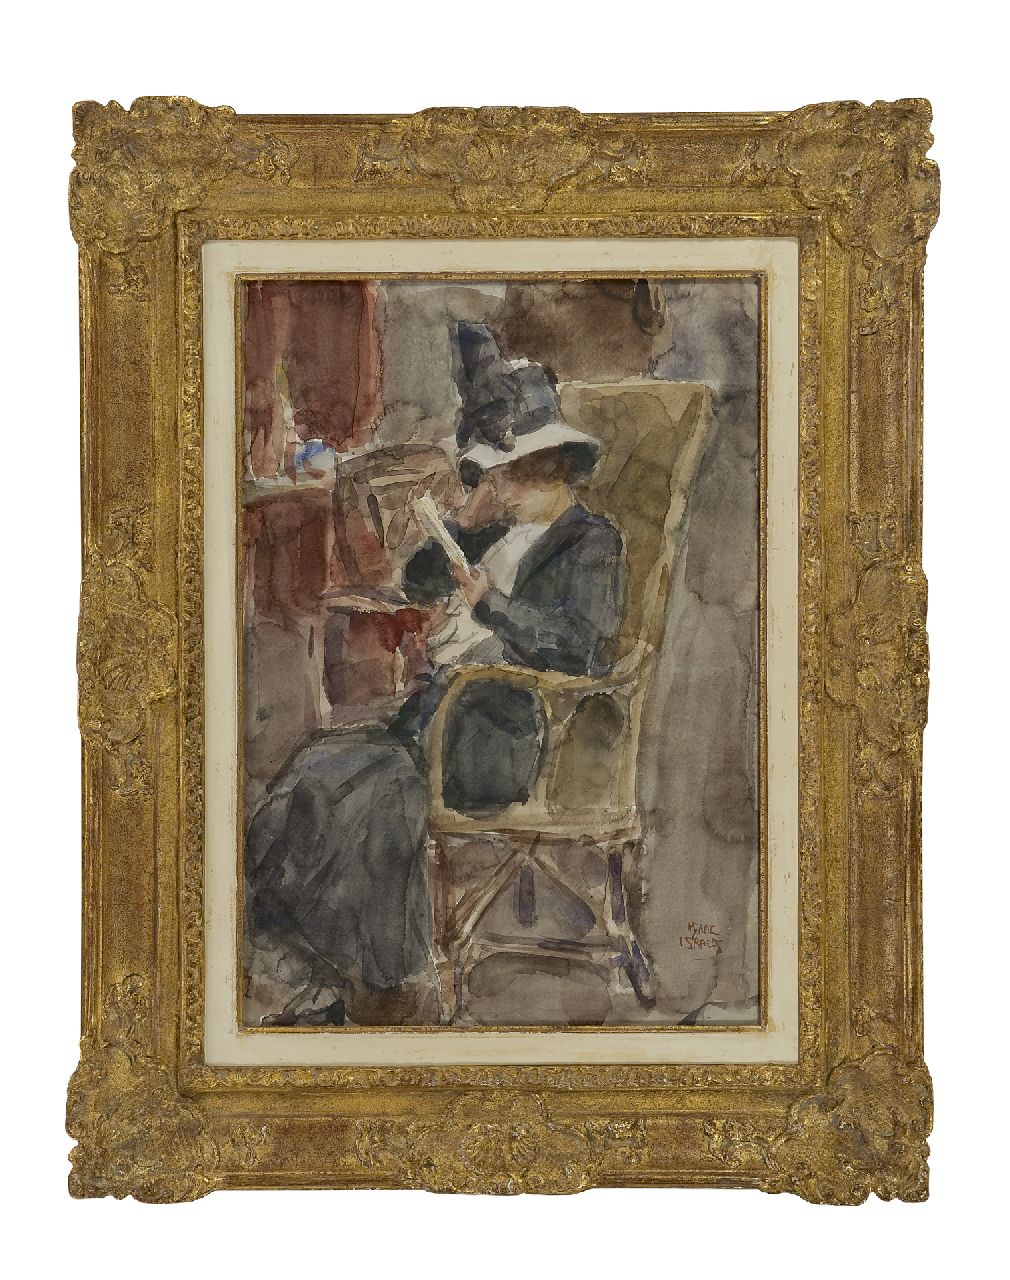 Israels I.L.  | 'Isaac' Lazarus Israels, A woman, reading, watercolour on paper 50.7 x 35.4 cm, signed l.r.